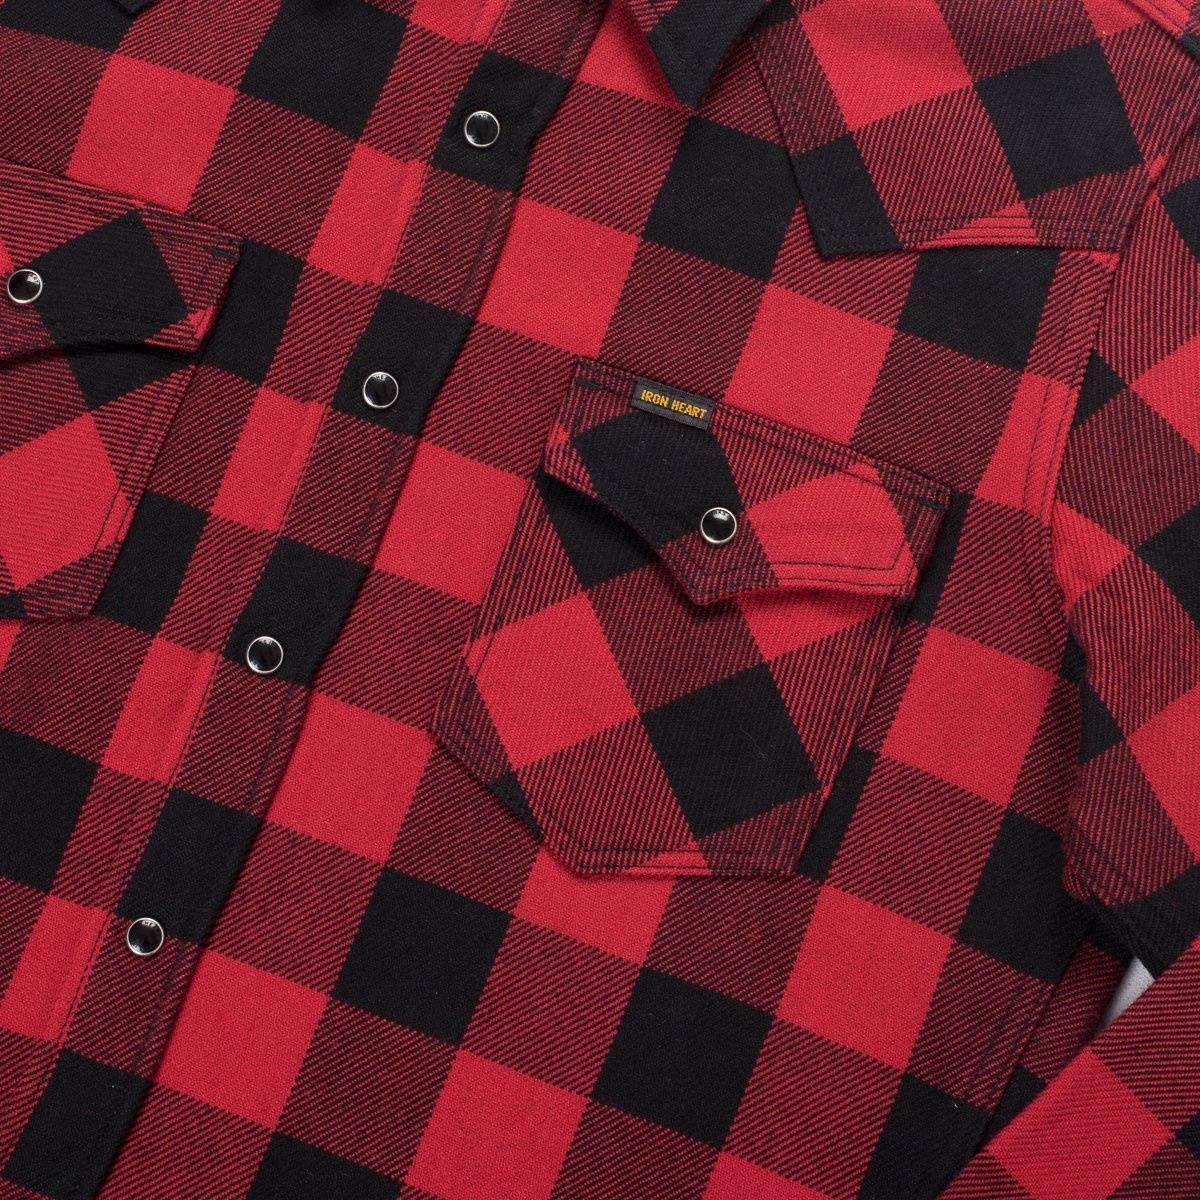 IHSH-232-RED Ultra Heavy Flannel Buffalo Check Western Shirt - Red/Black - 8